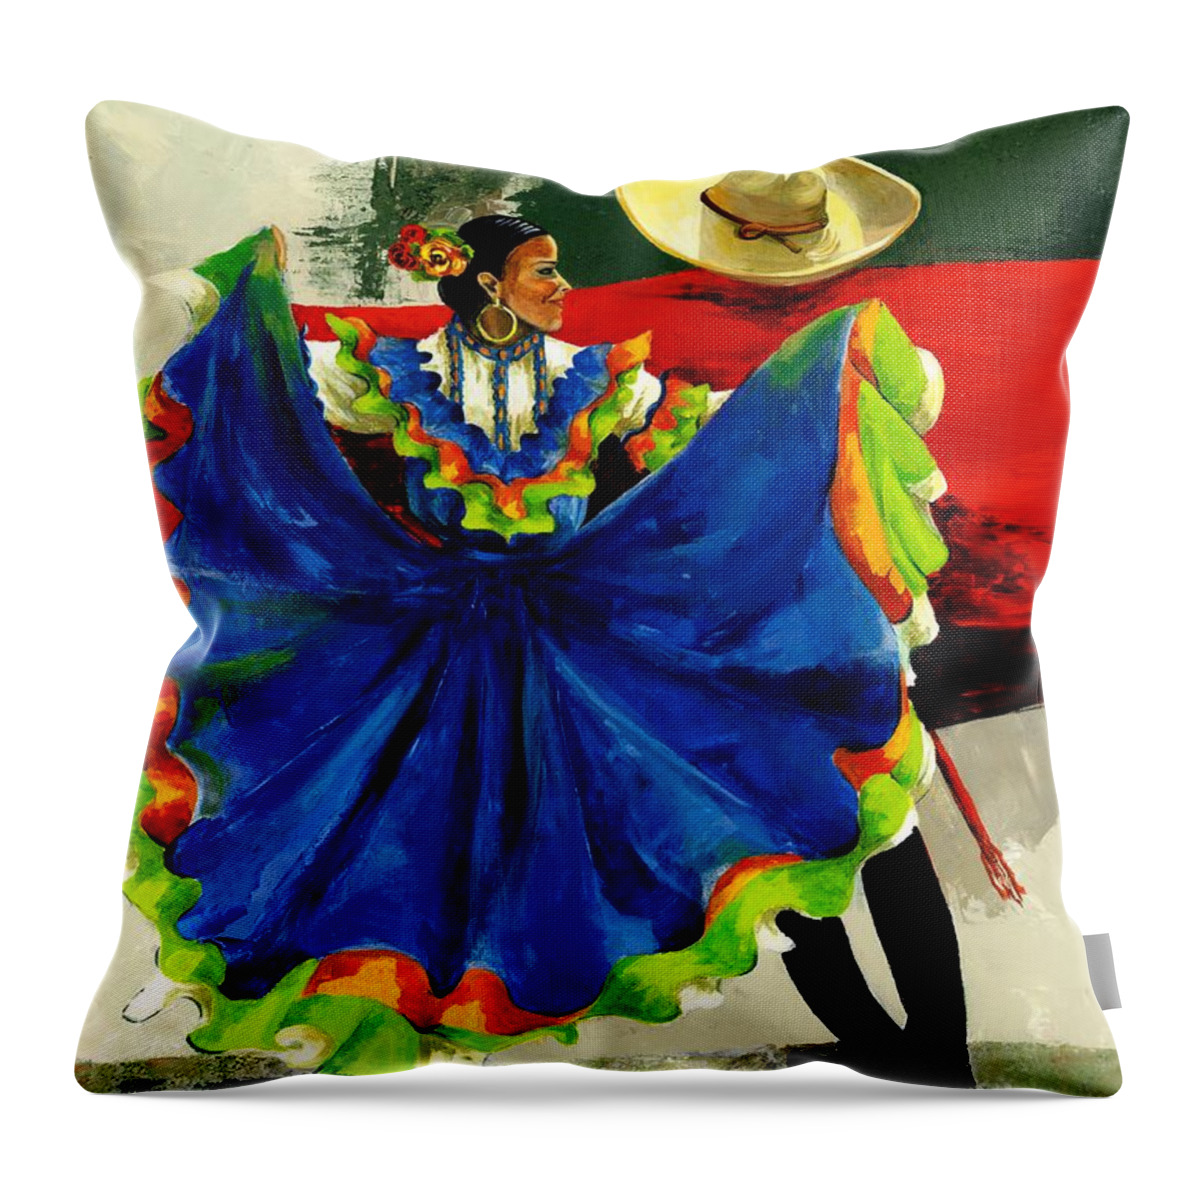 Canvas Prints Throw Pillow featuring the painting Mexican Dancers by Elisabeta Hermann